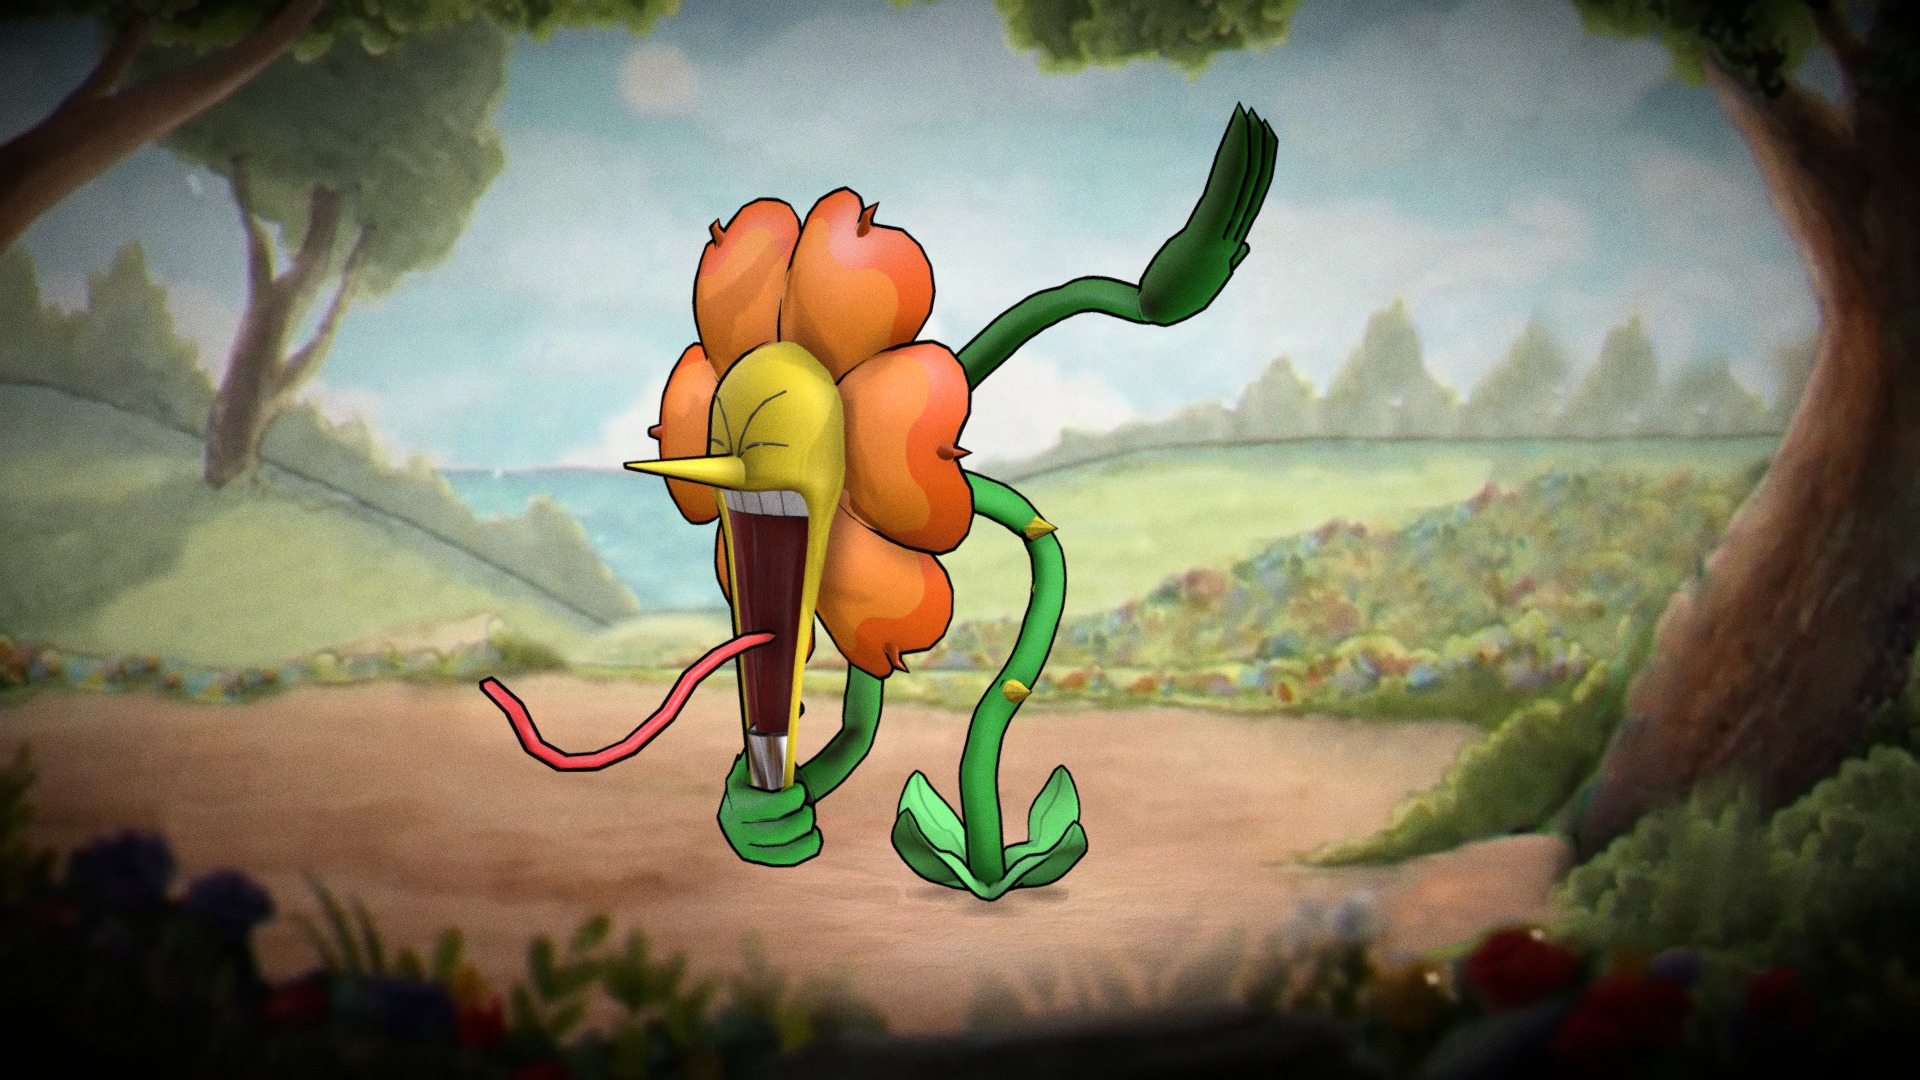 Fan Art of the flower boss from the game Cuphead. 
Exercise for blendshapes and cartoon style deformation.
Maya, Substance Painter 3d model